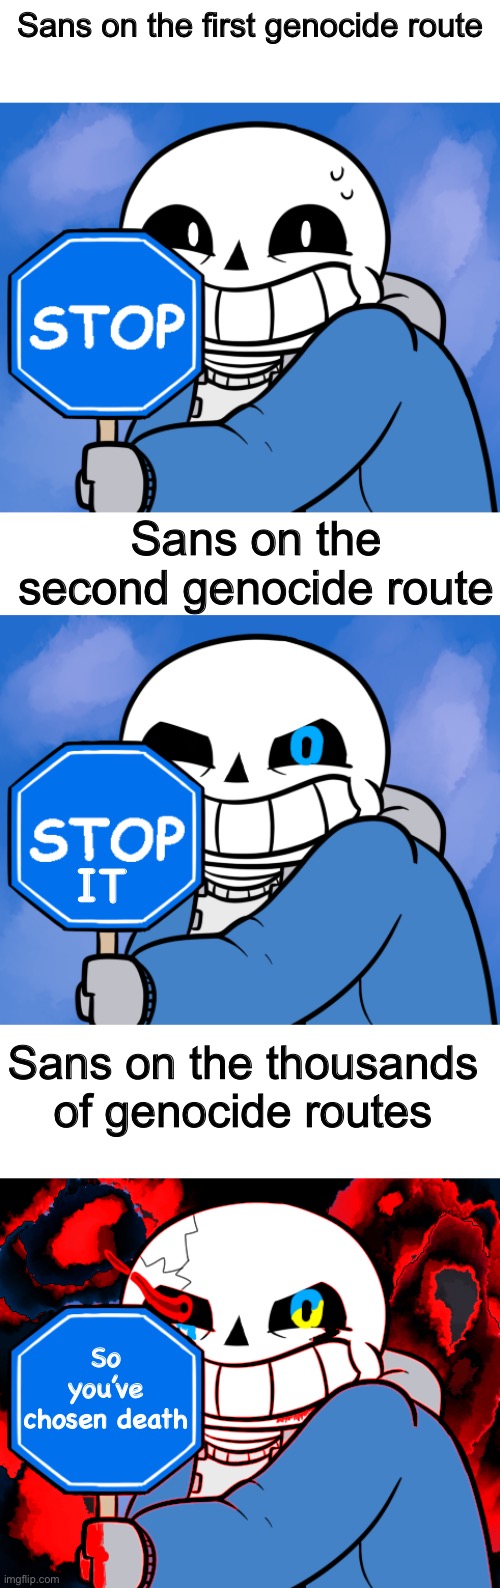 Painful route | Sans on the first genocide route; Sans on the second genocide route; IT; Sans on the thousands of genocide routes; So you’ve chosen death | image tagged in memes,funny,so you have chosen death,sans,undertale,genocide | made w/ Imgflip meme maker